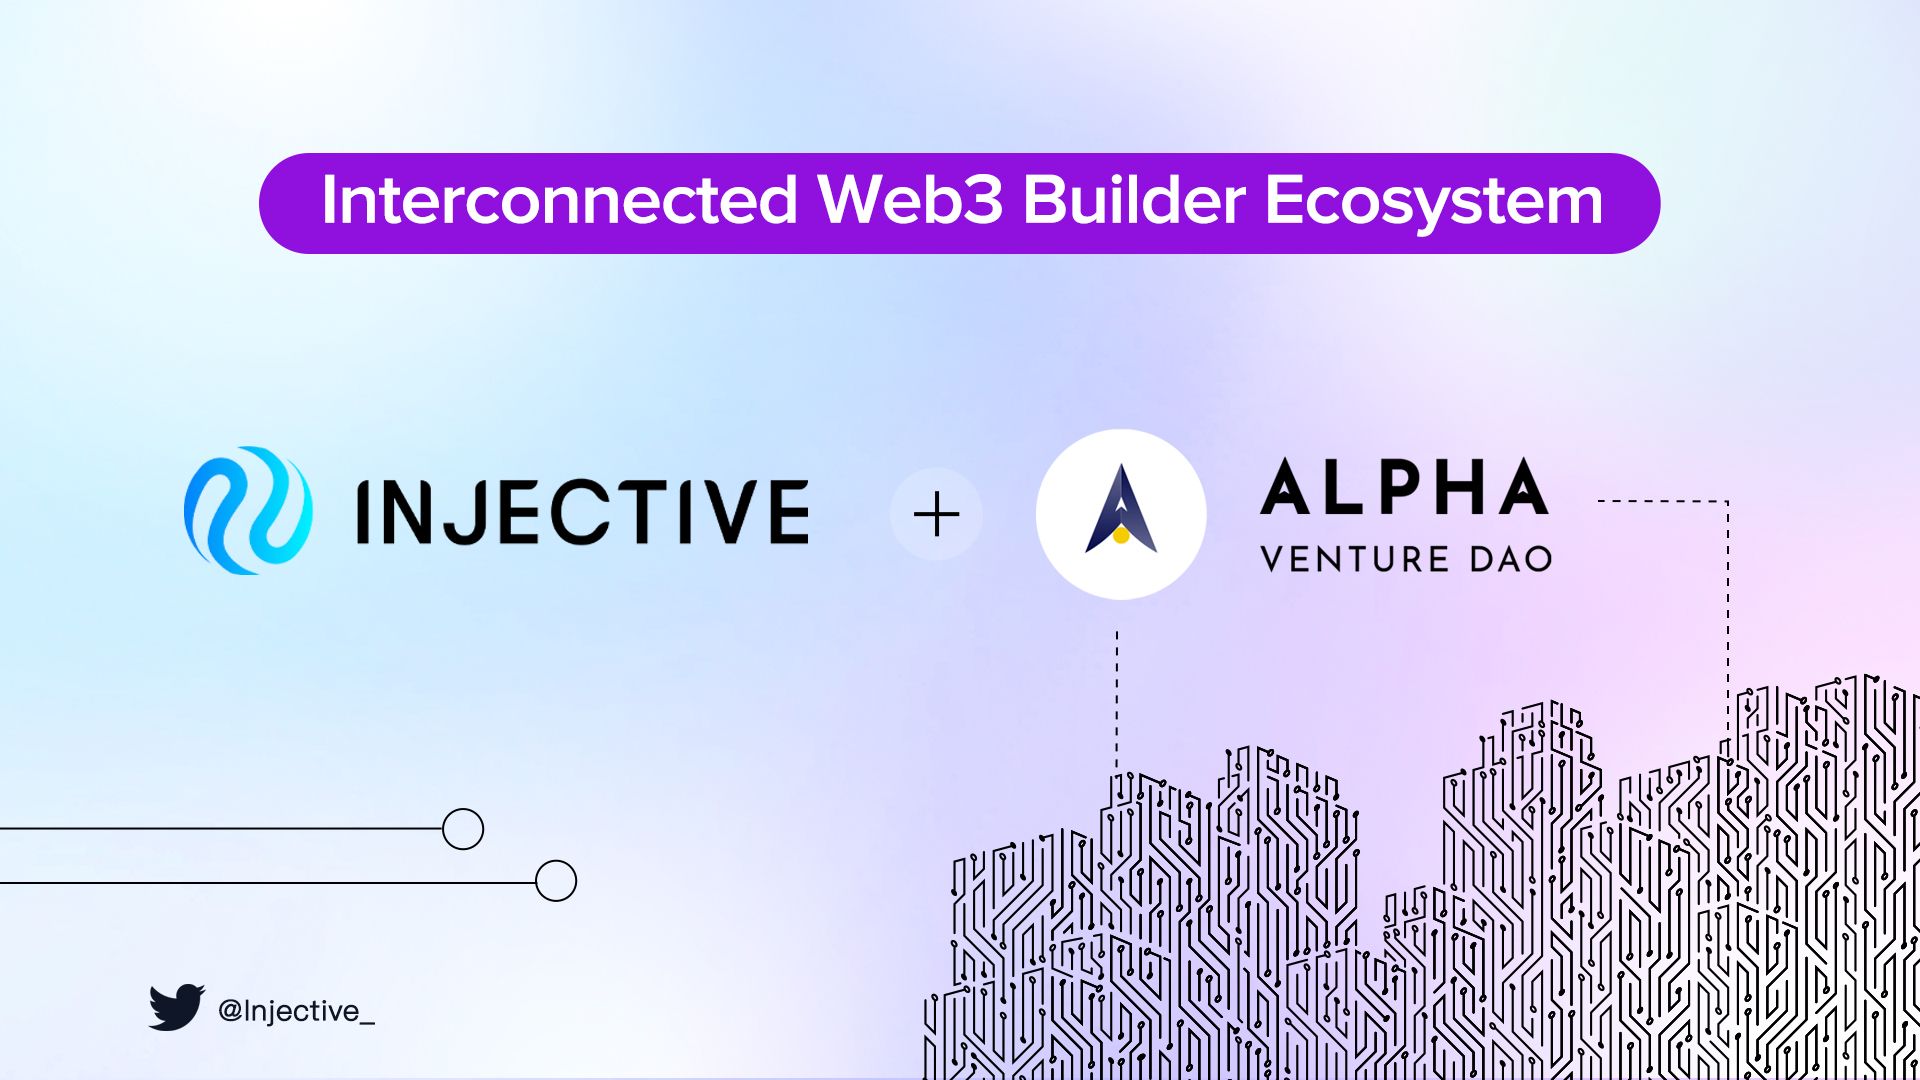 Injective and Alpha Venture DAO are Collaborating to Spearhead an Interconnected Web3 Builder Ecosystem